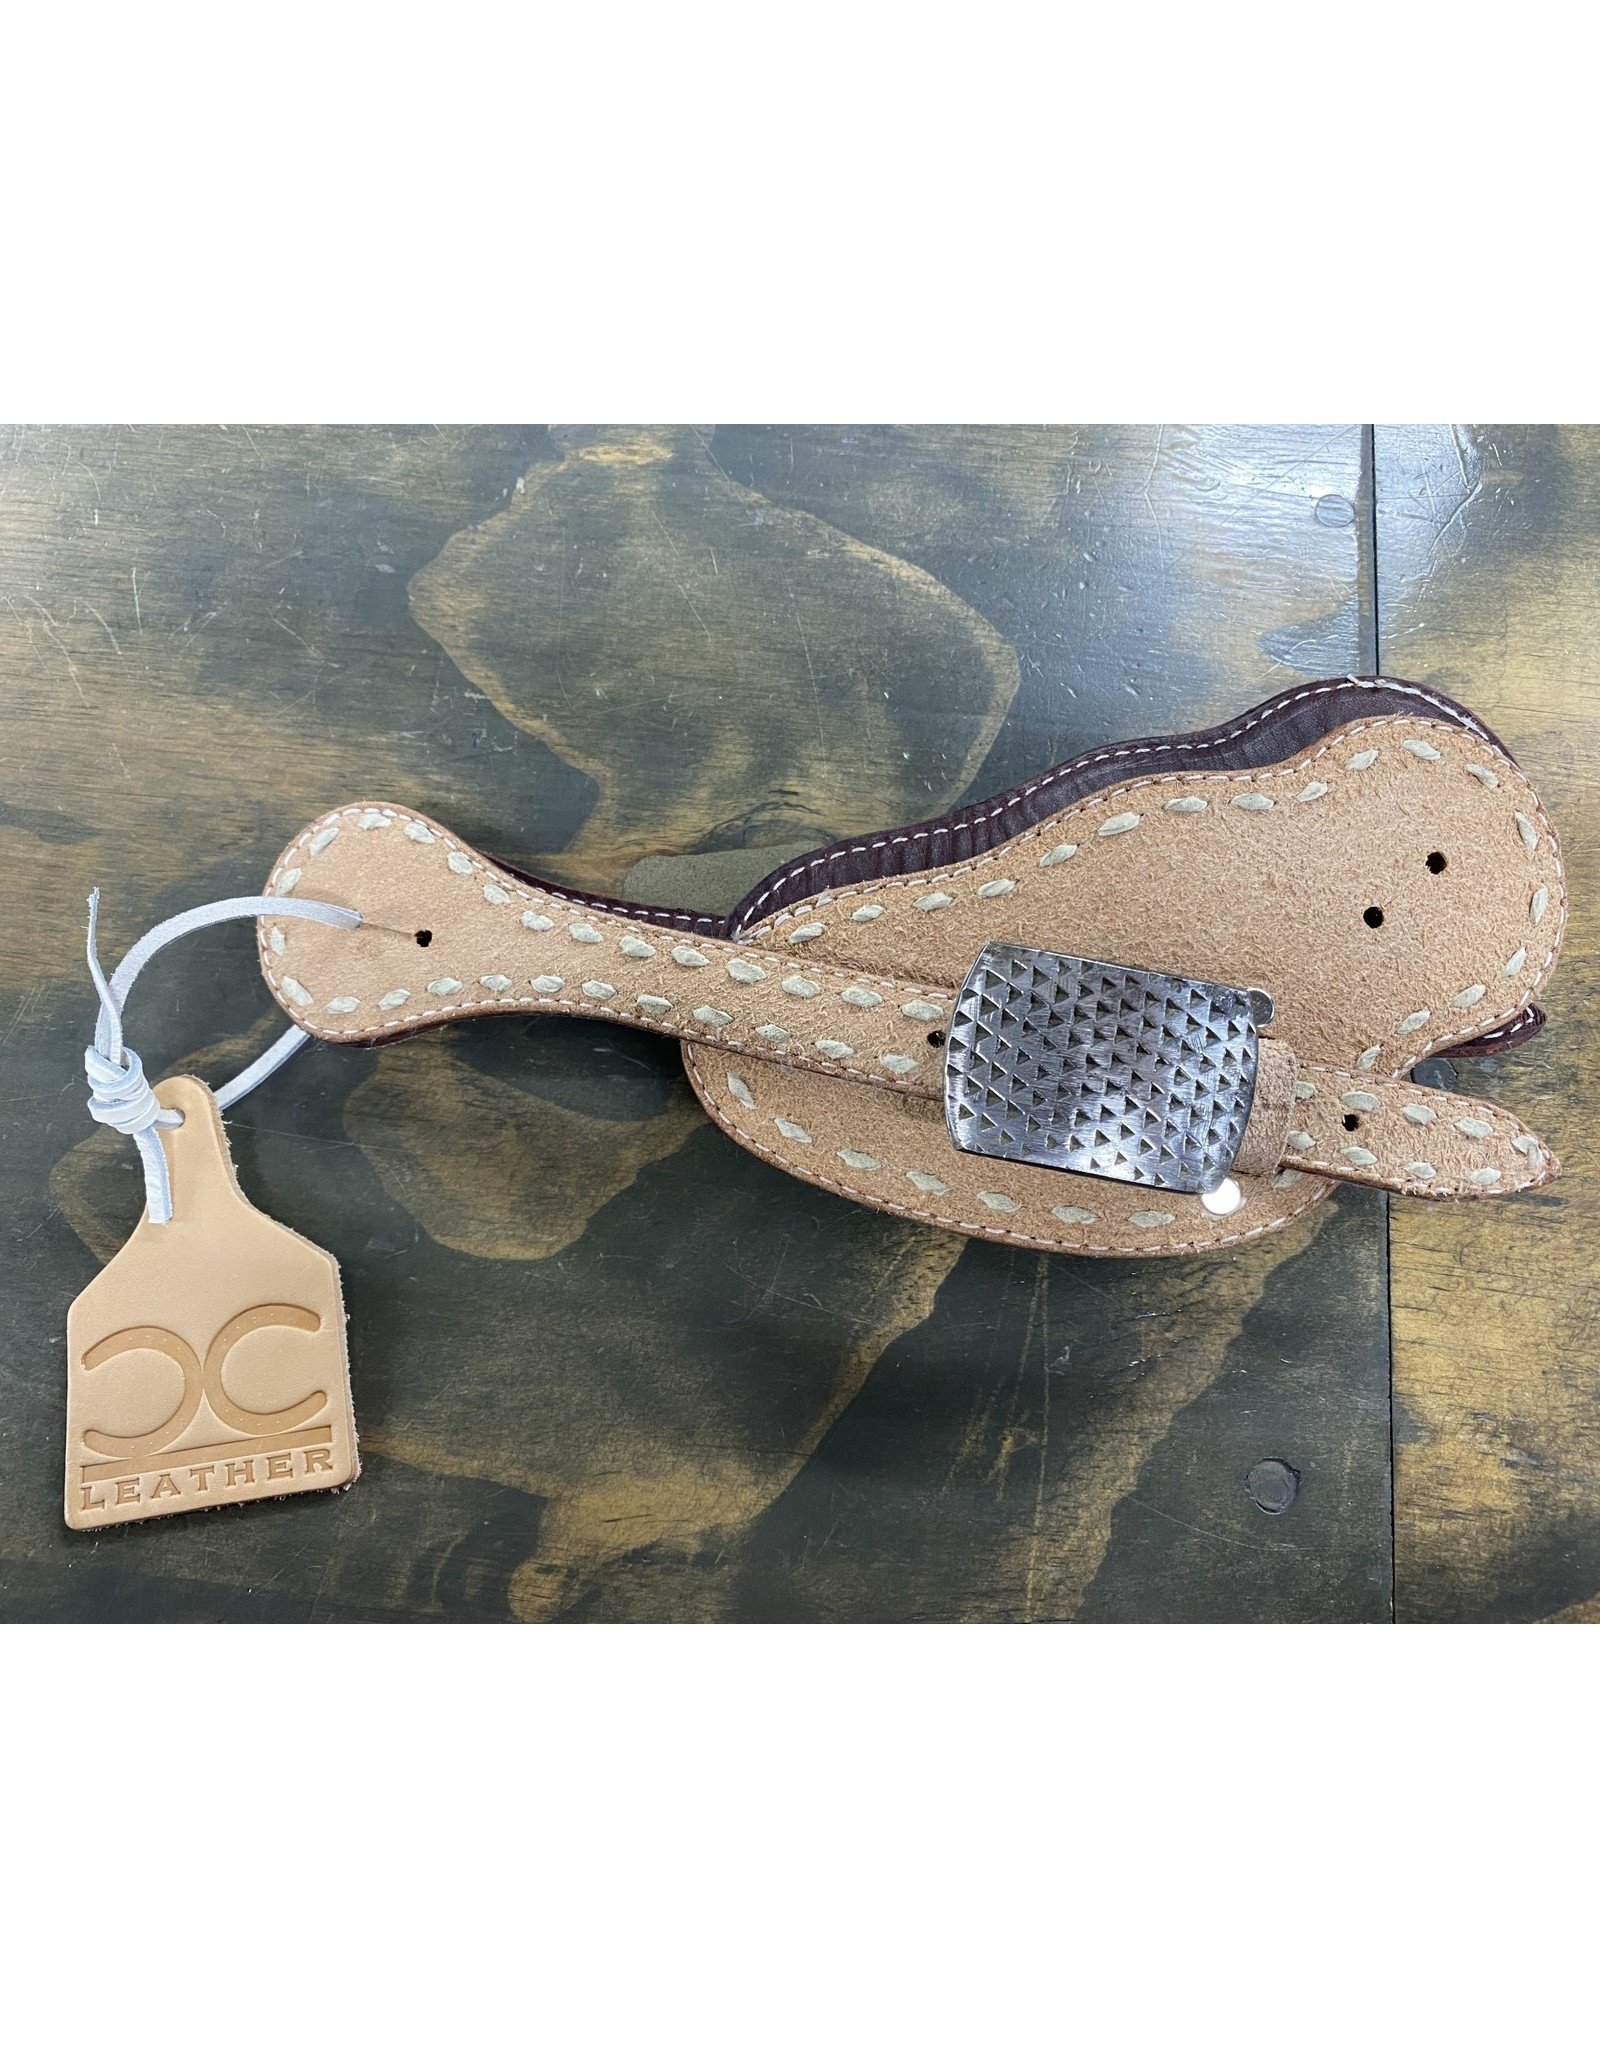 Chase Combs Leather Roughout Buckstitched Spur Straps